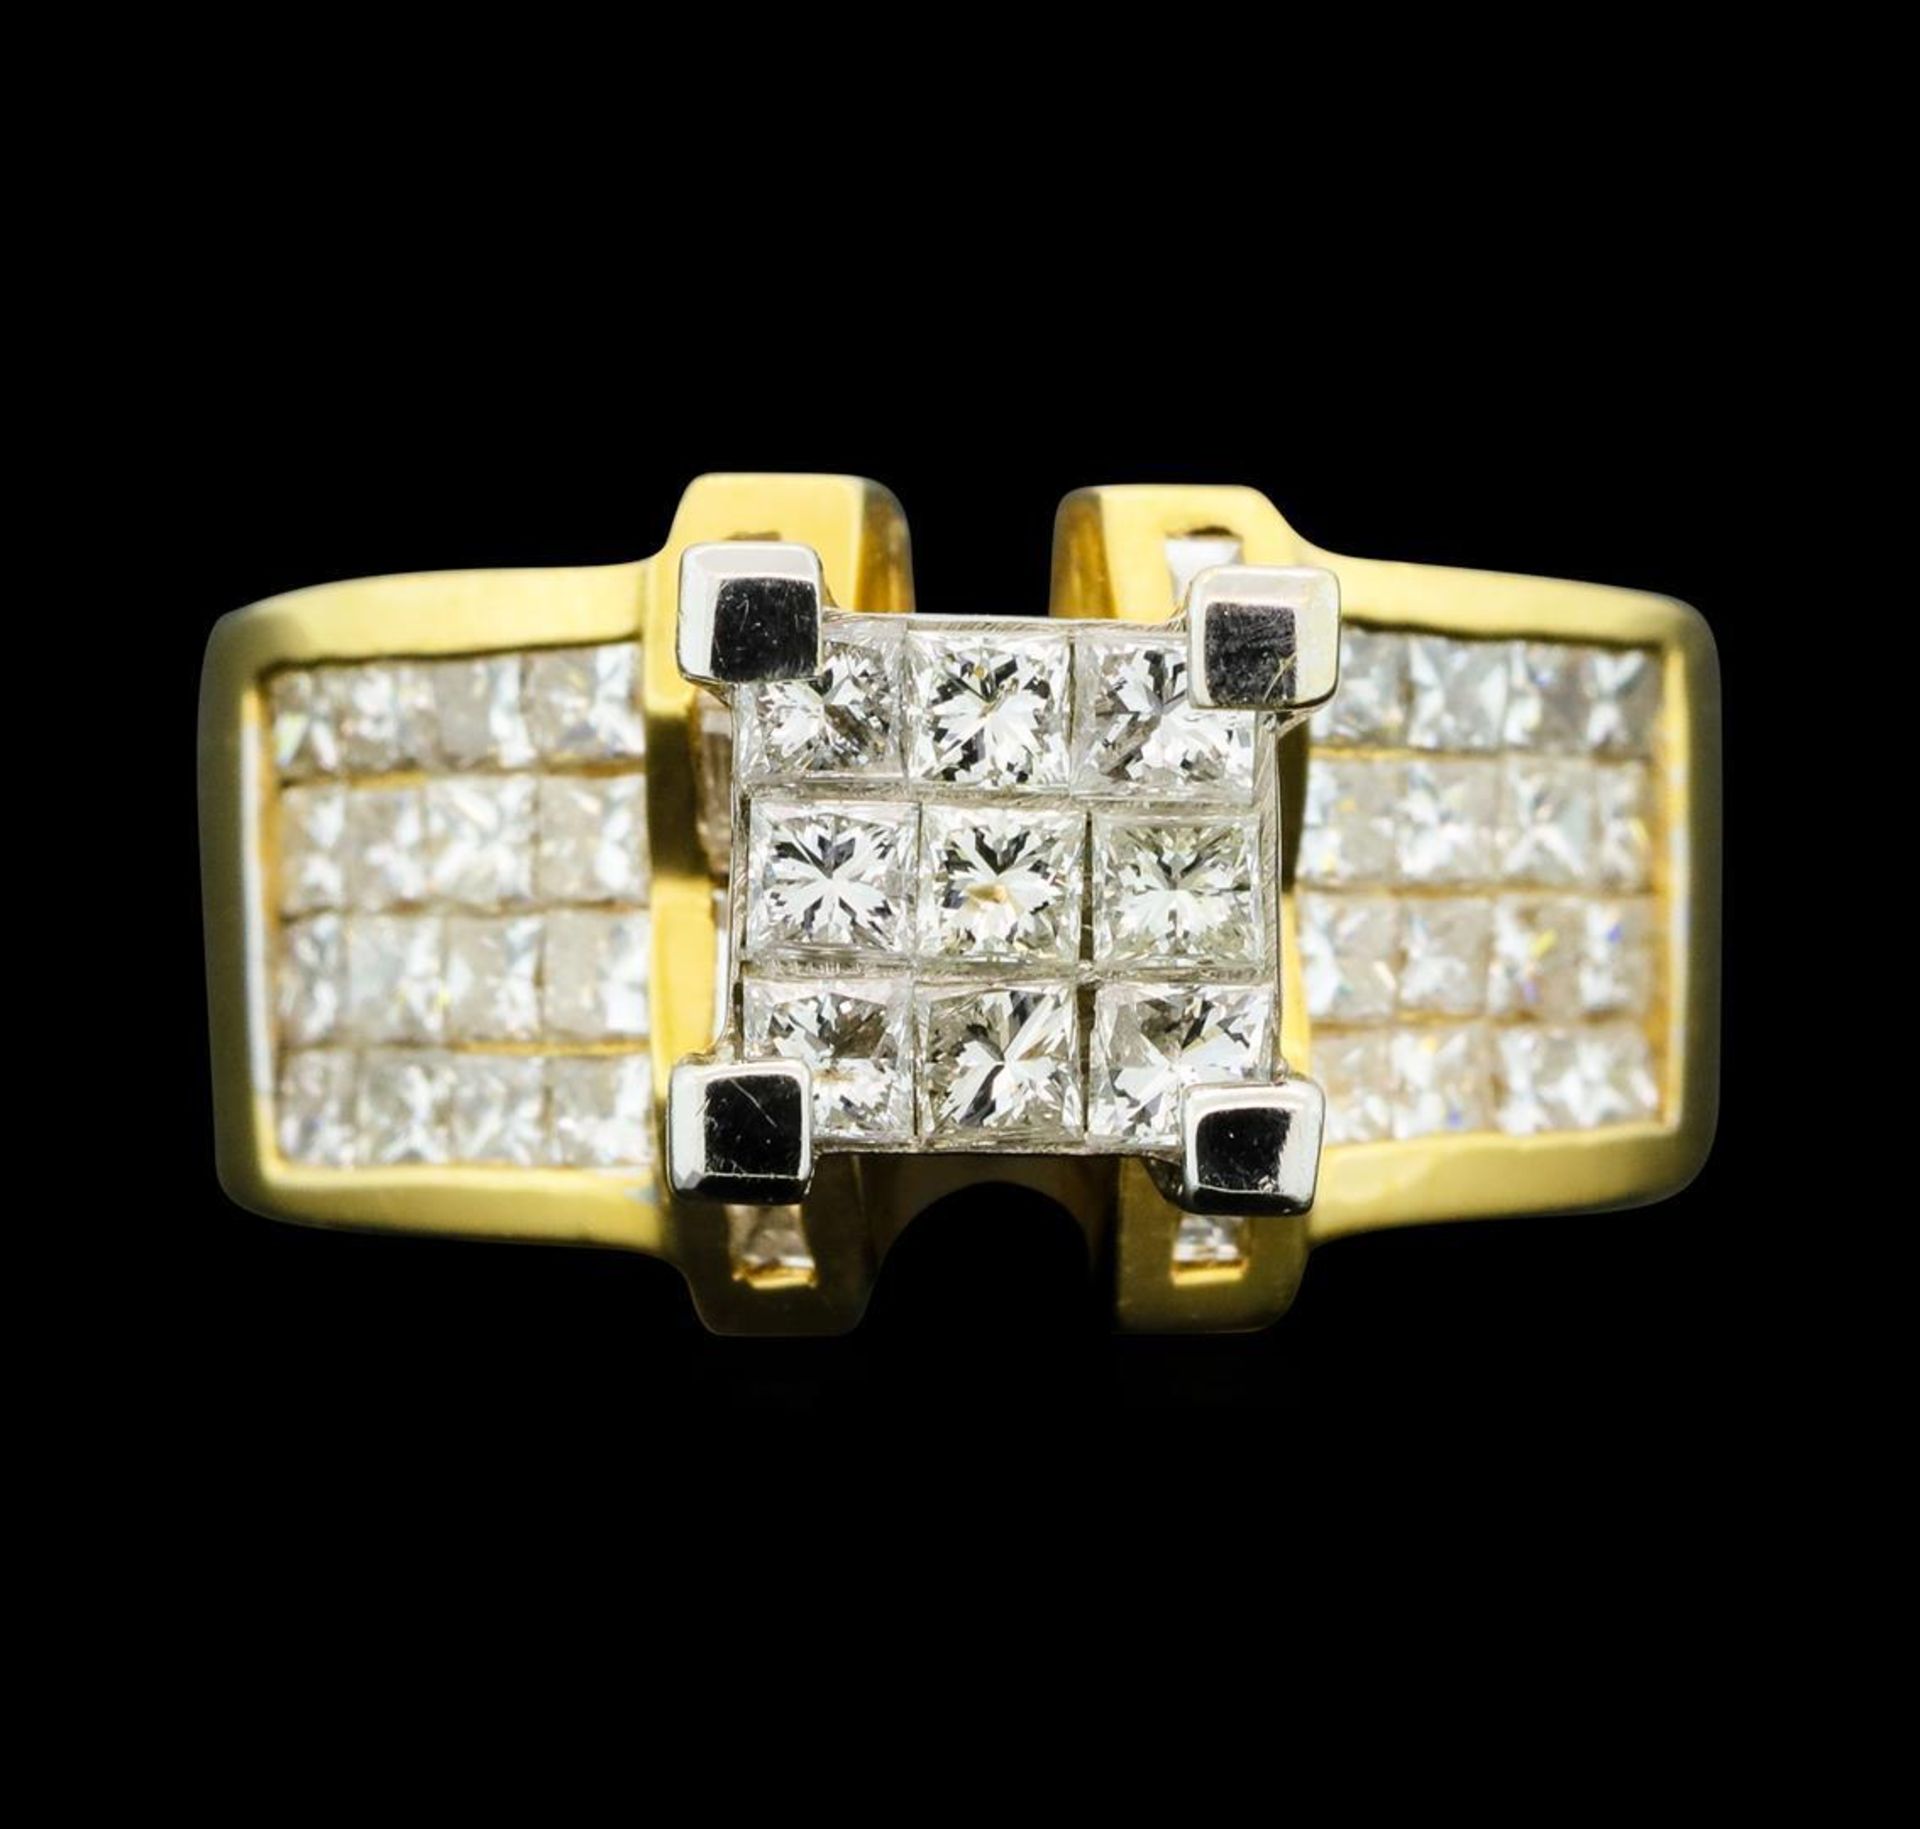 2.10 ctw Diamond Ring - 14KT Yellow And White Gold - Image 2 of 5